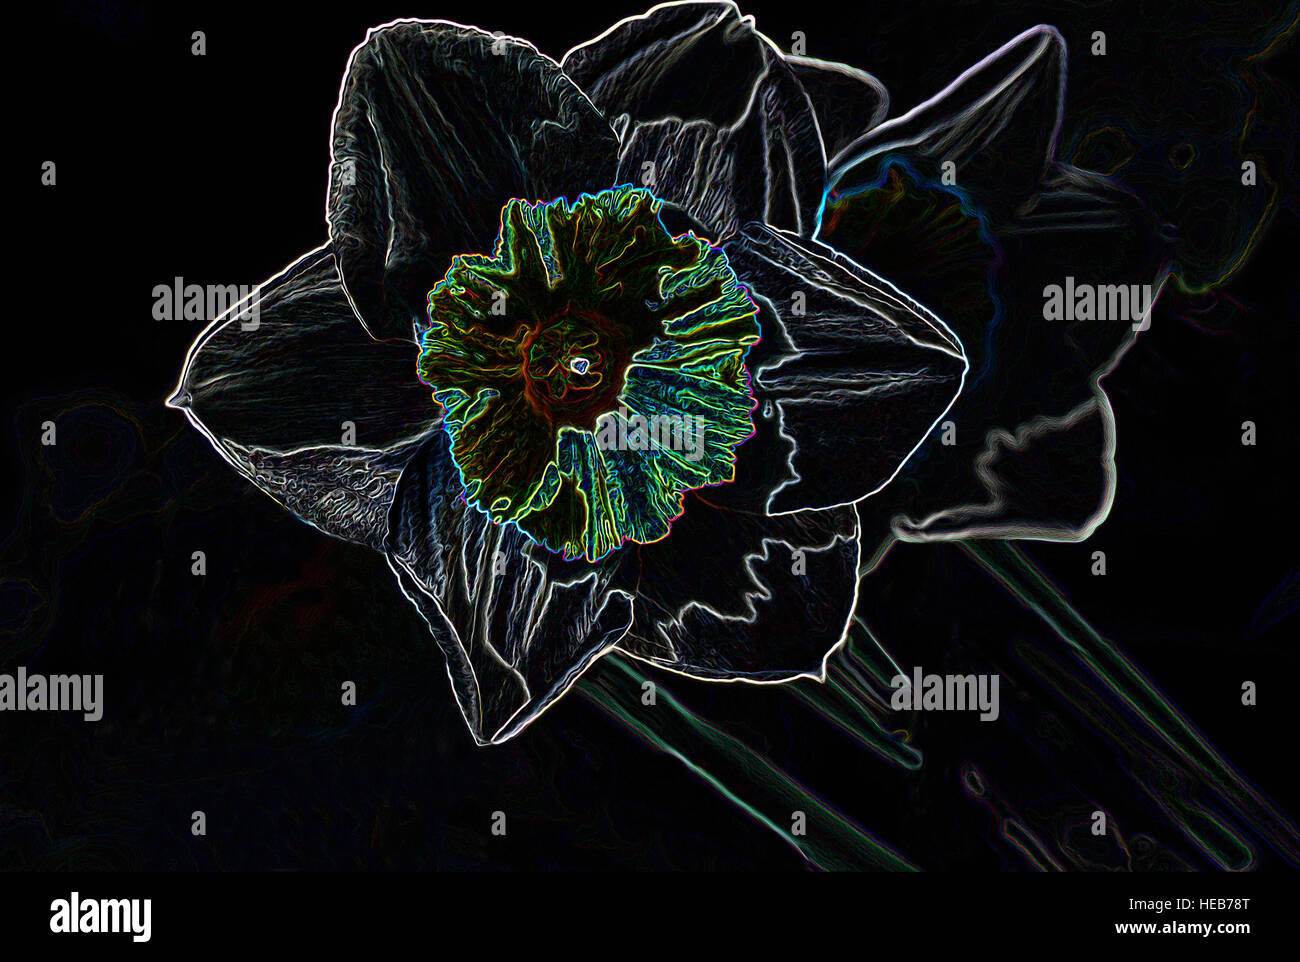 Daffodil (Narcissus) in bloom - Digitally Manipulated Image with Glowing Edges, Abstract Flower / Flowers on a Black Background Stock Photo